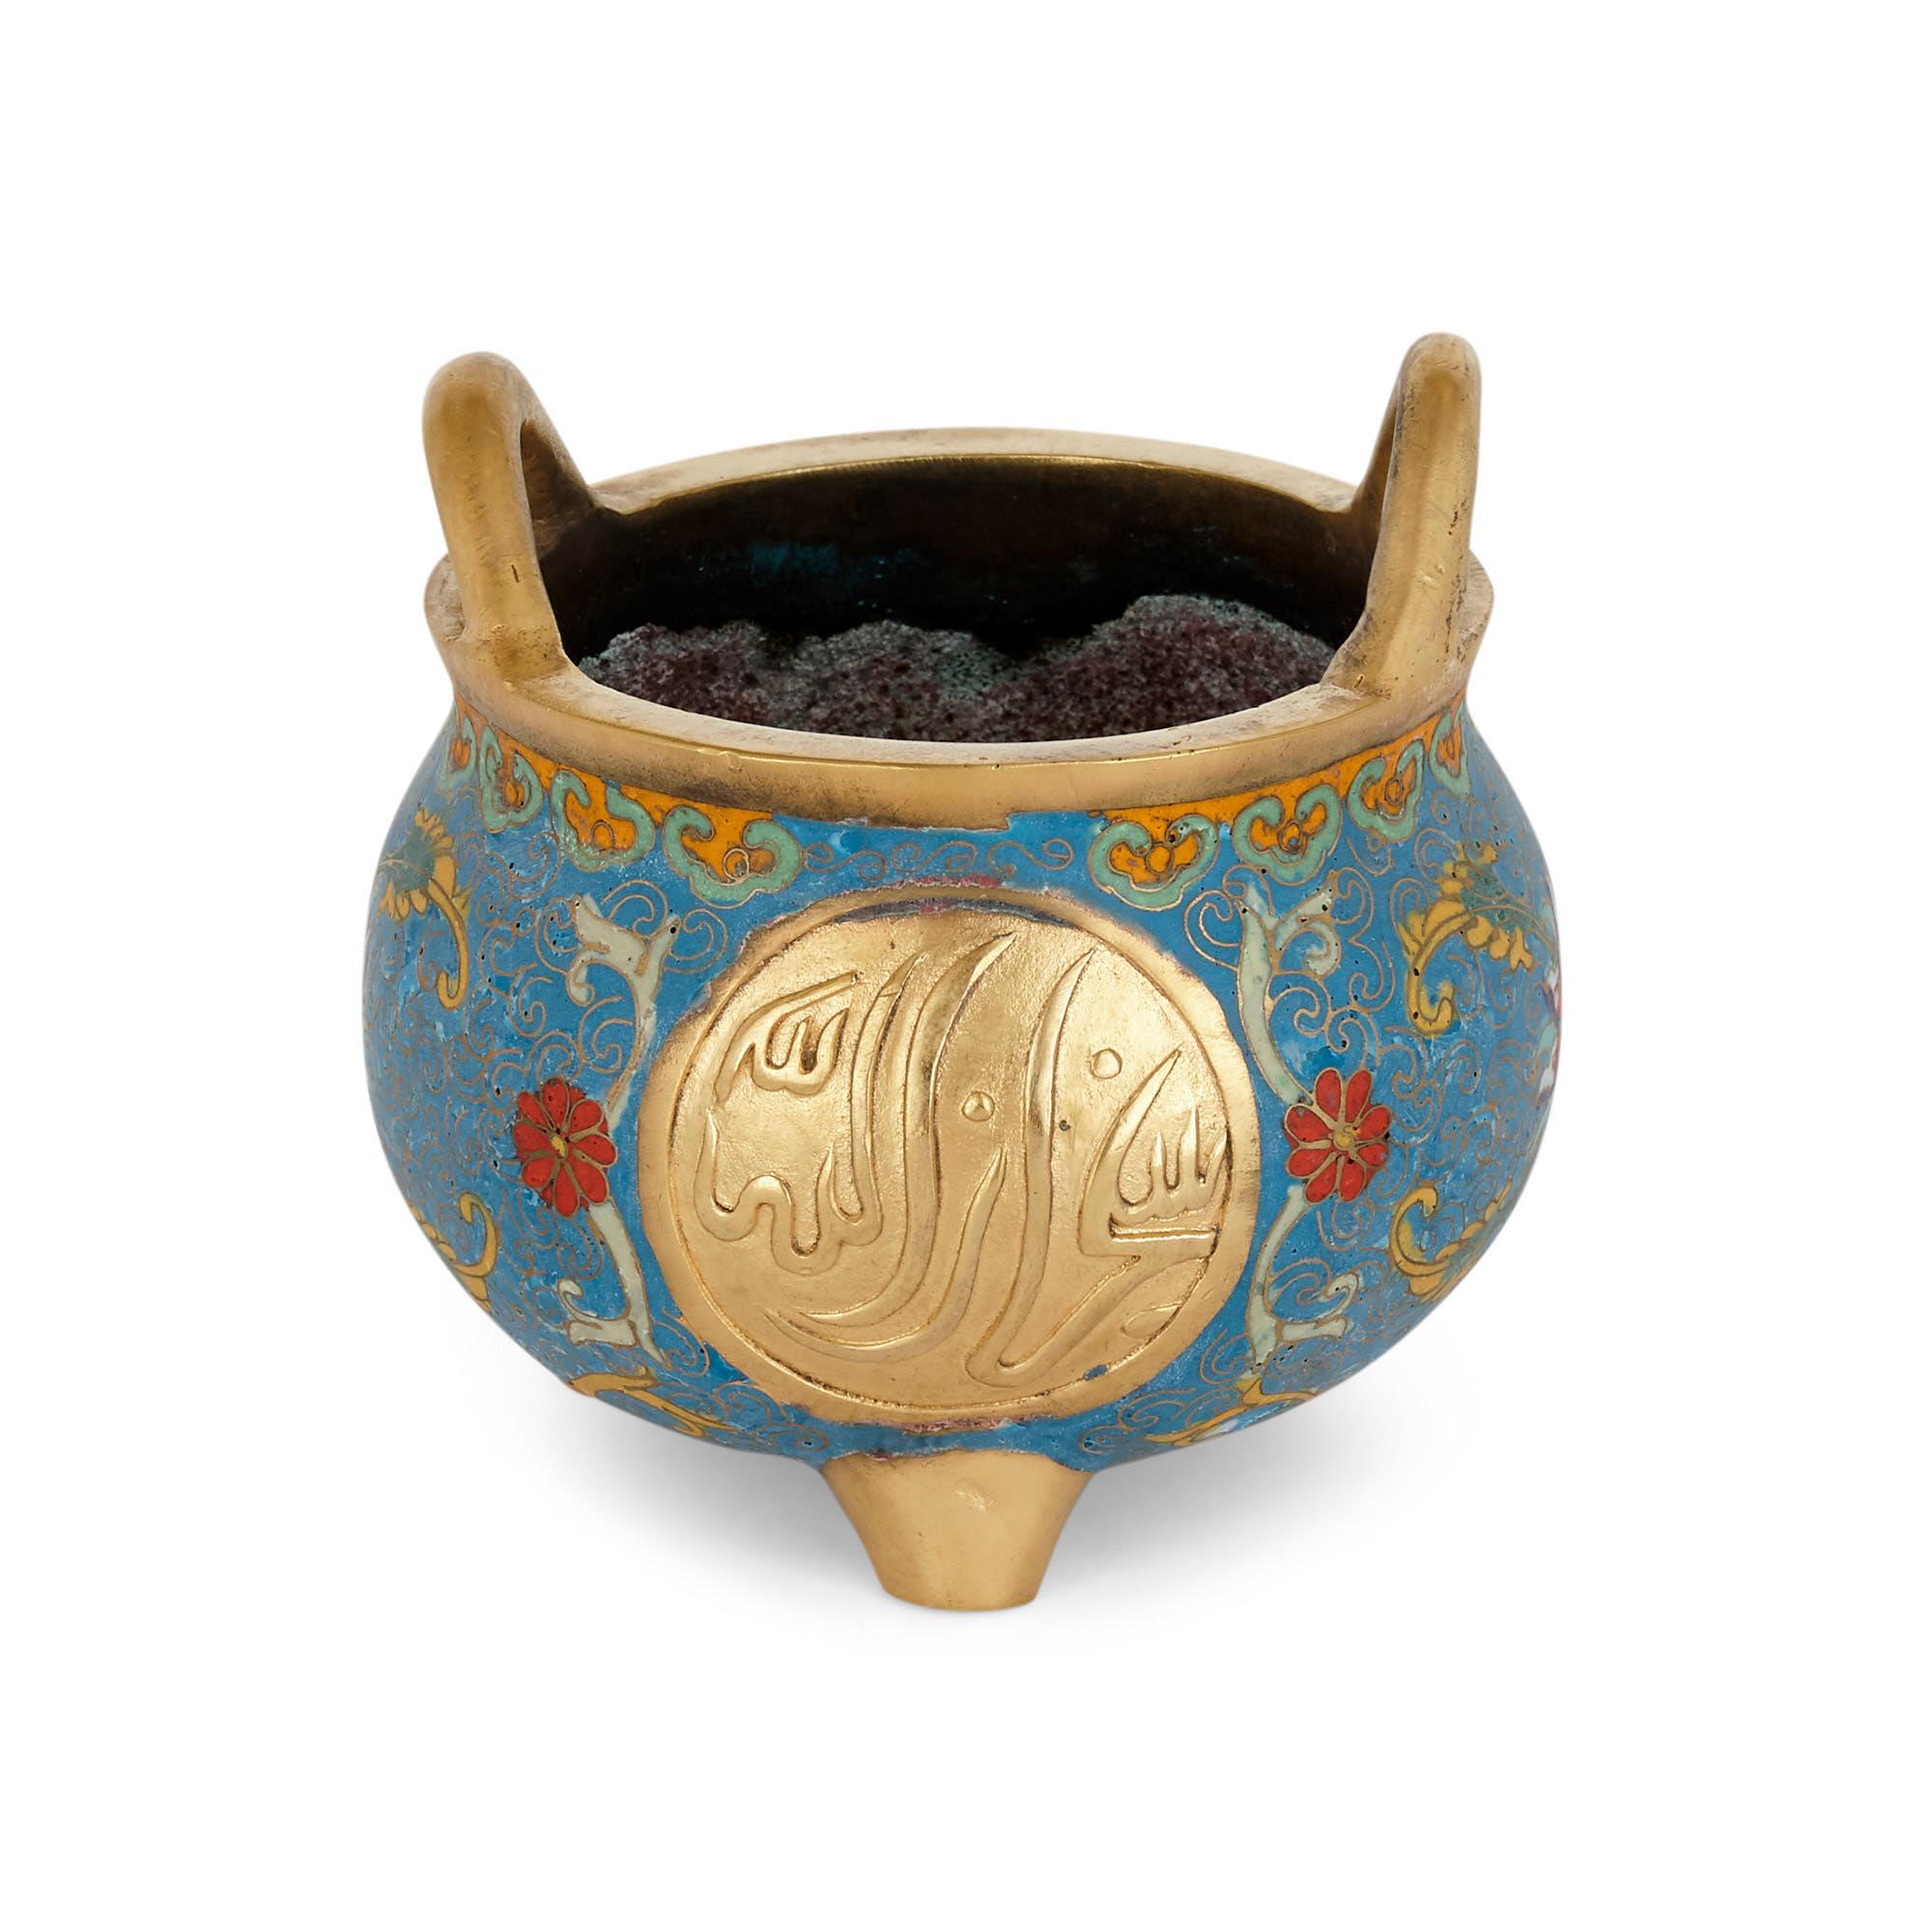 Chinese Floral Islamic style cloisonné enamel and Ormolu vase
Chinese, early 20th century
Dimensions: Height 14cm, diameter 14cm

This beautiful bowl is a superb example of Chinese export ware designed for an Islamic market. The bowl is crafted